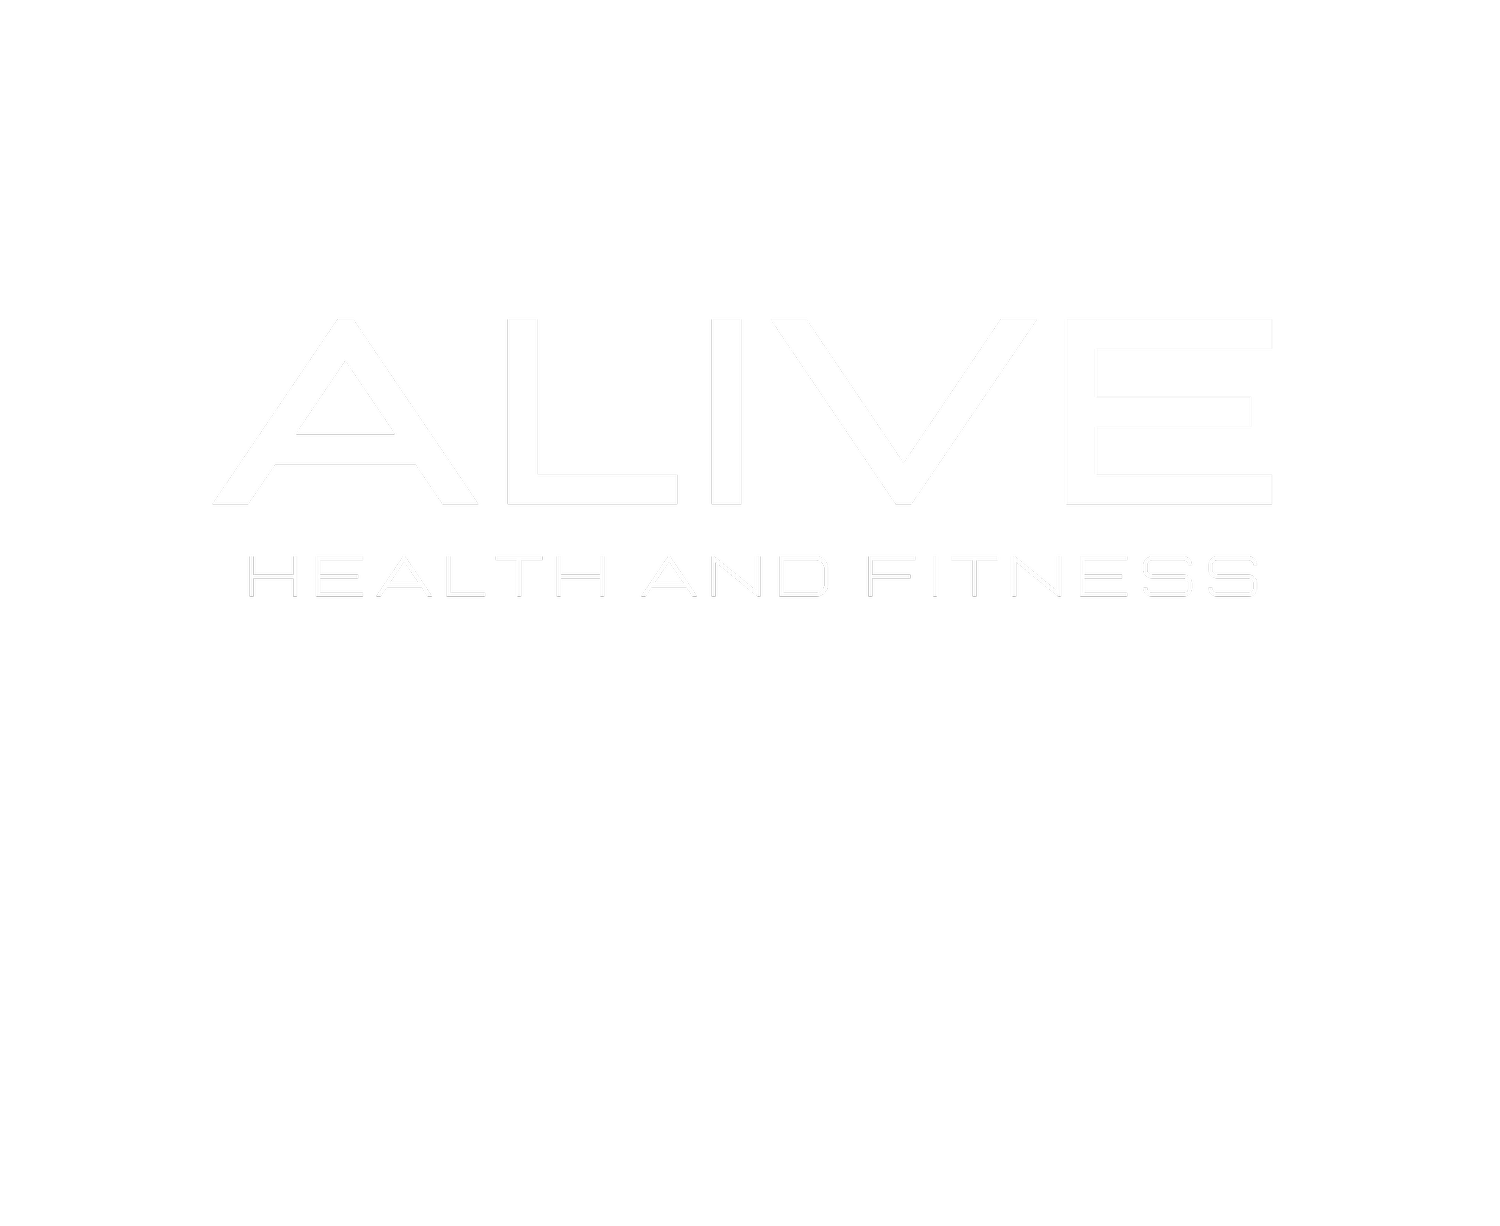 ALIVE - Health and Fitness